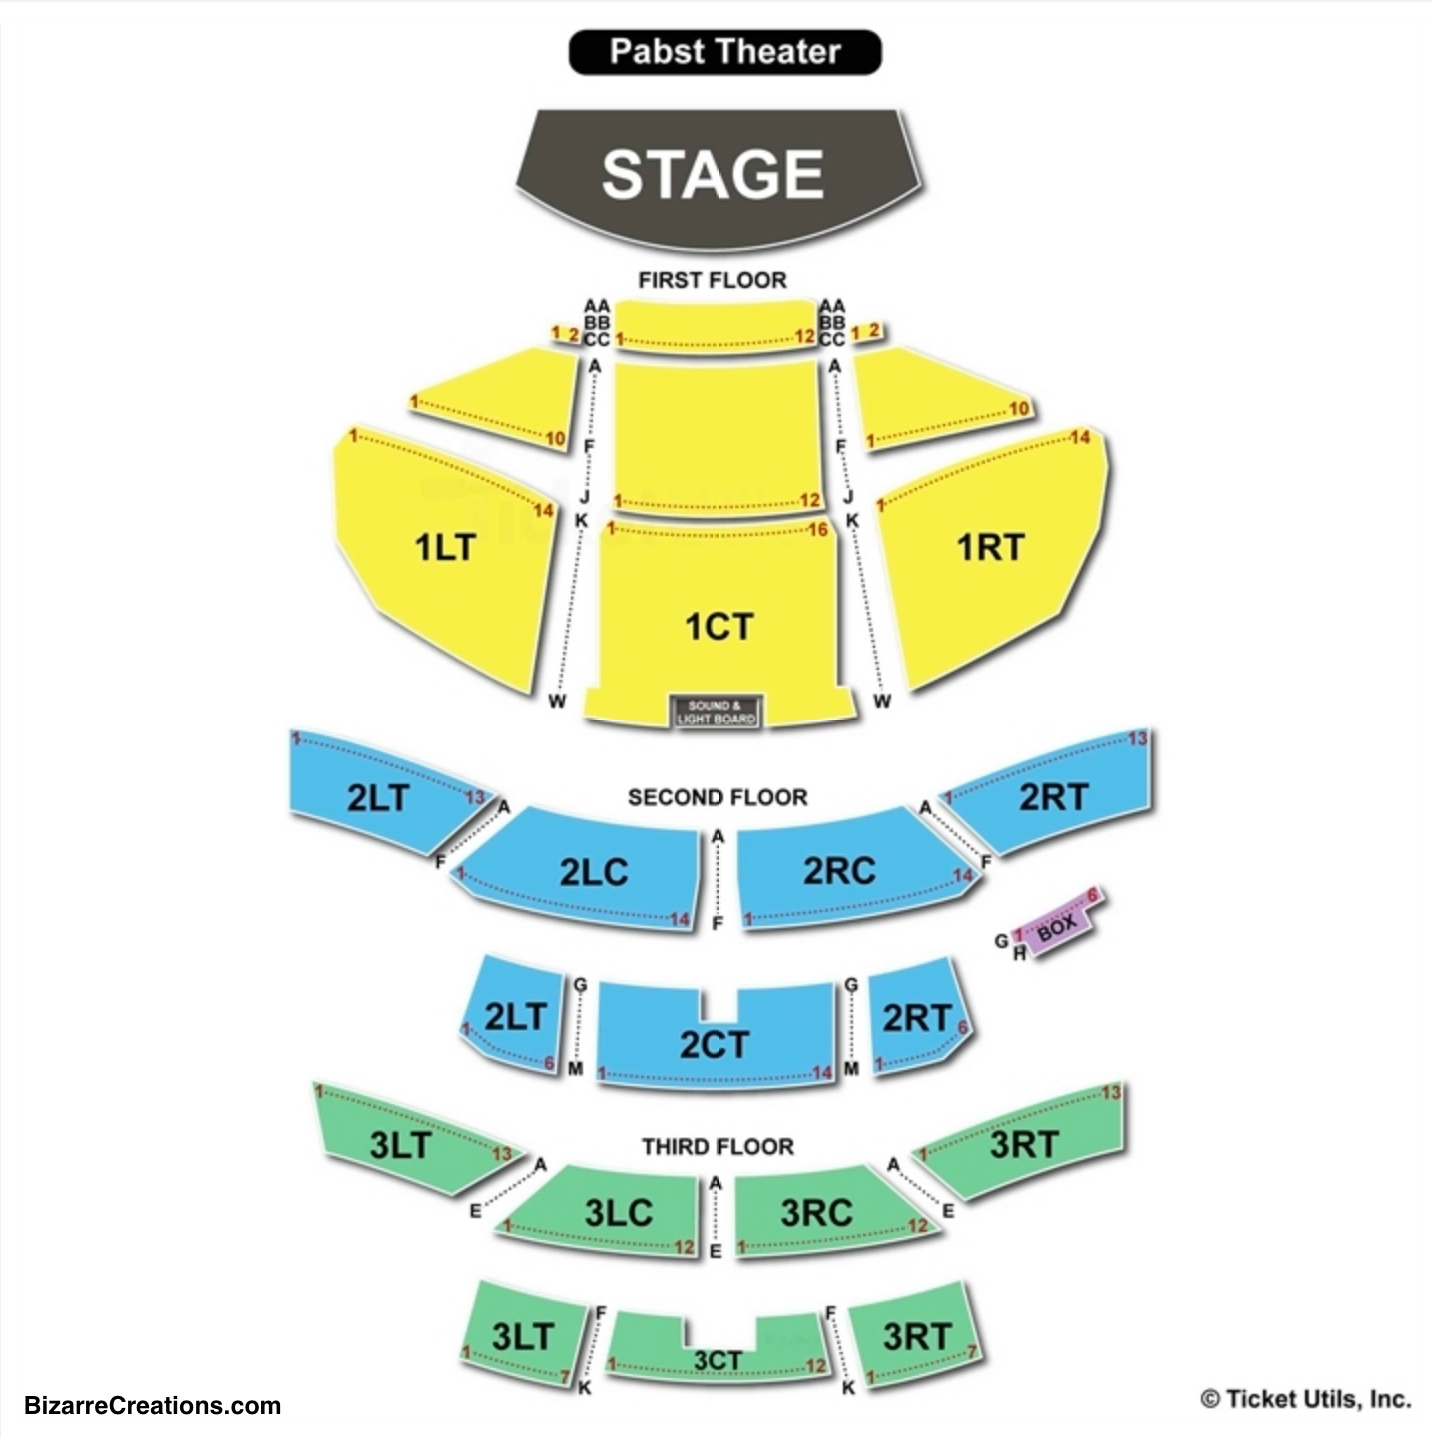 Stranahan Theater Seating Chart - Stranahan Theatre Seating Chart Maps Tole...